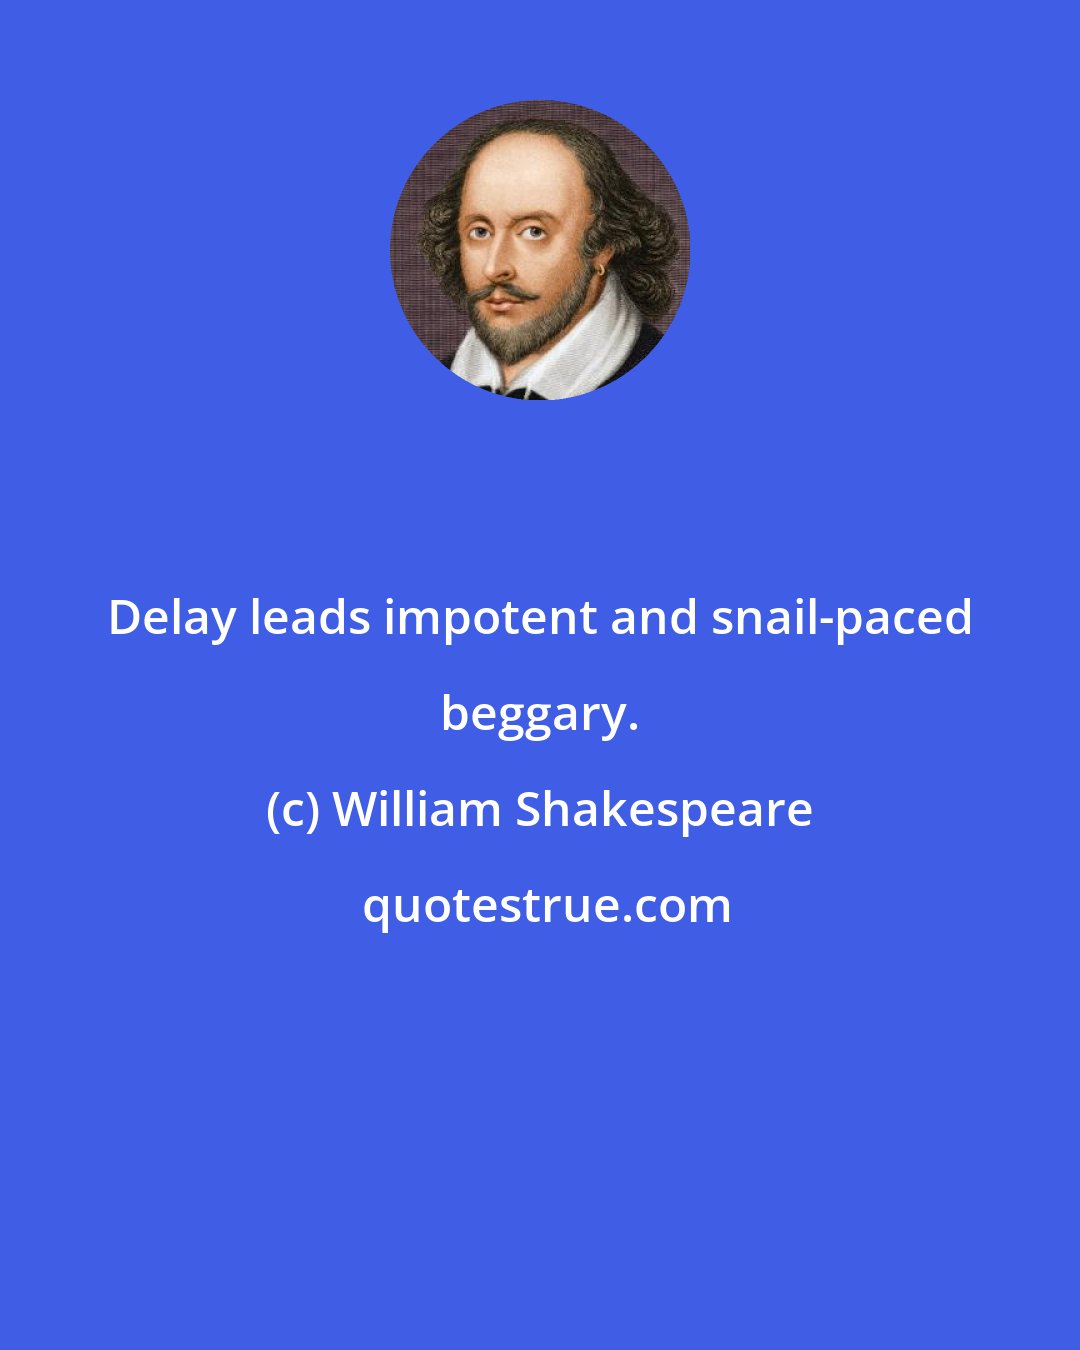 William Shakespeare: Delay leads impotent and snail-paced beggary.